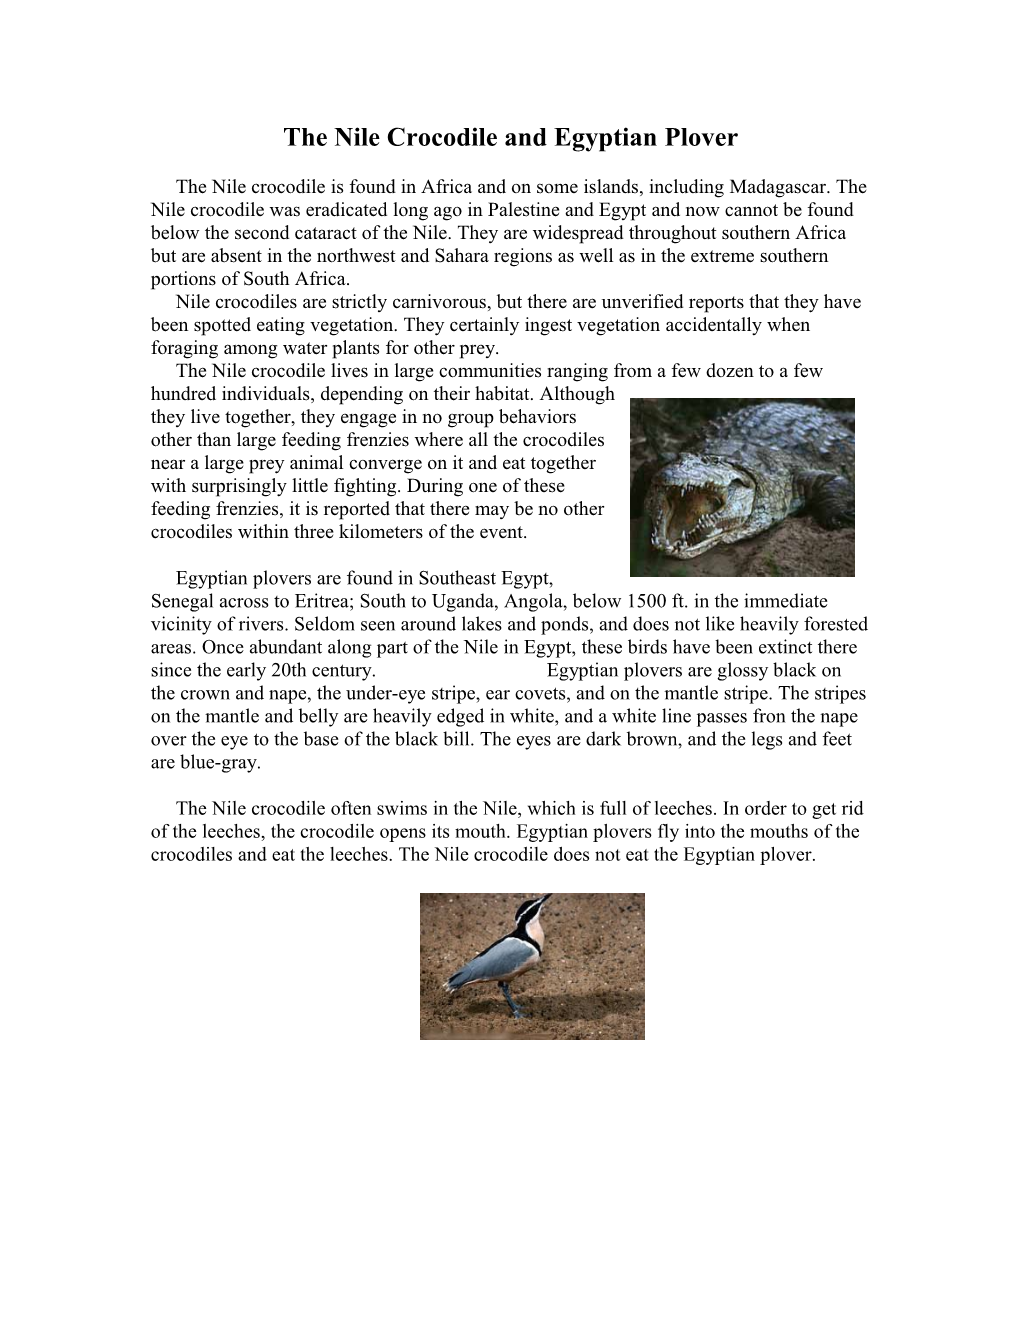 The Nile Crocodile and Egyptian Plover